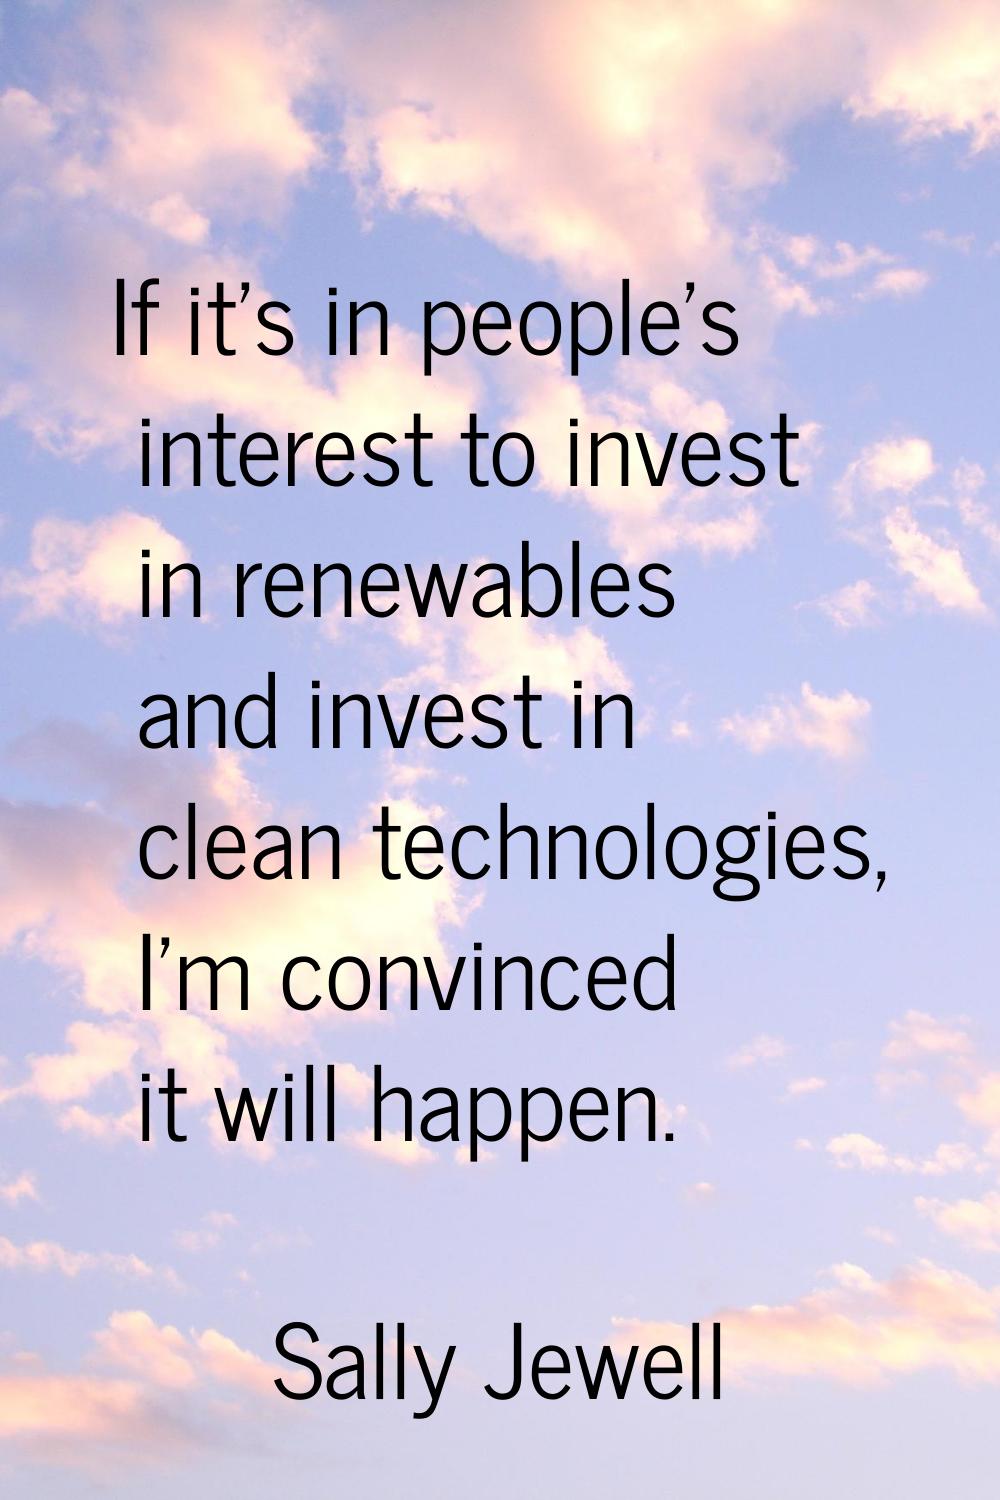 If it's in people's interest to invest in renewables and invest in clean technologies, I'm convince